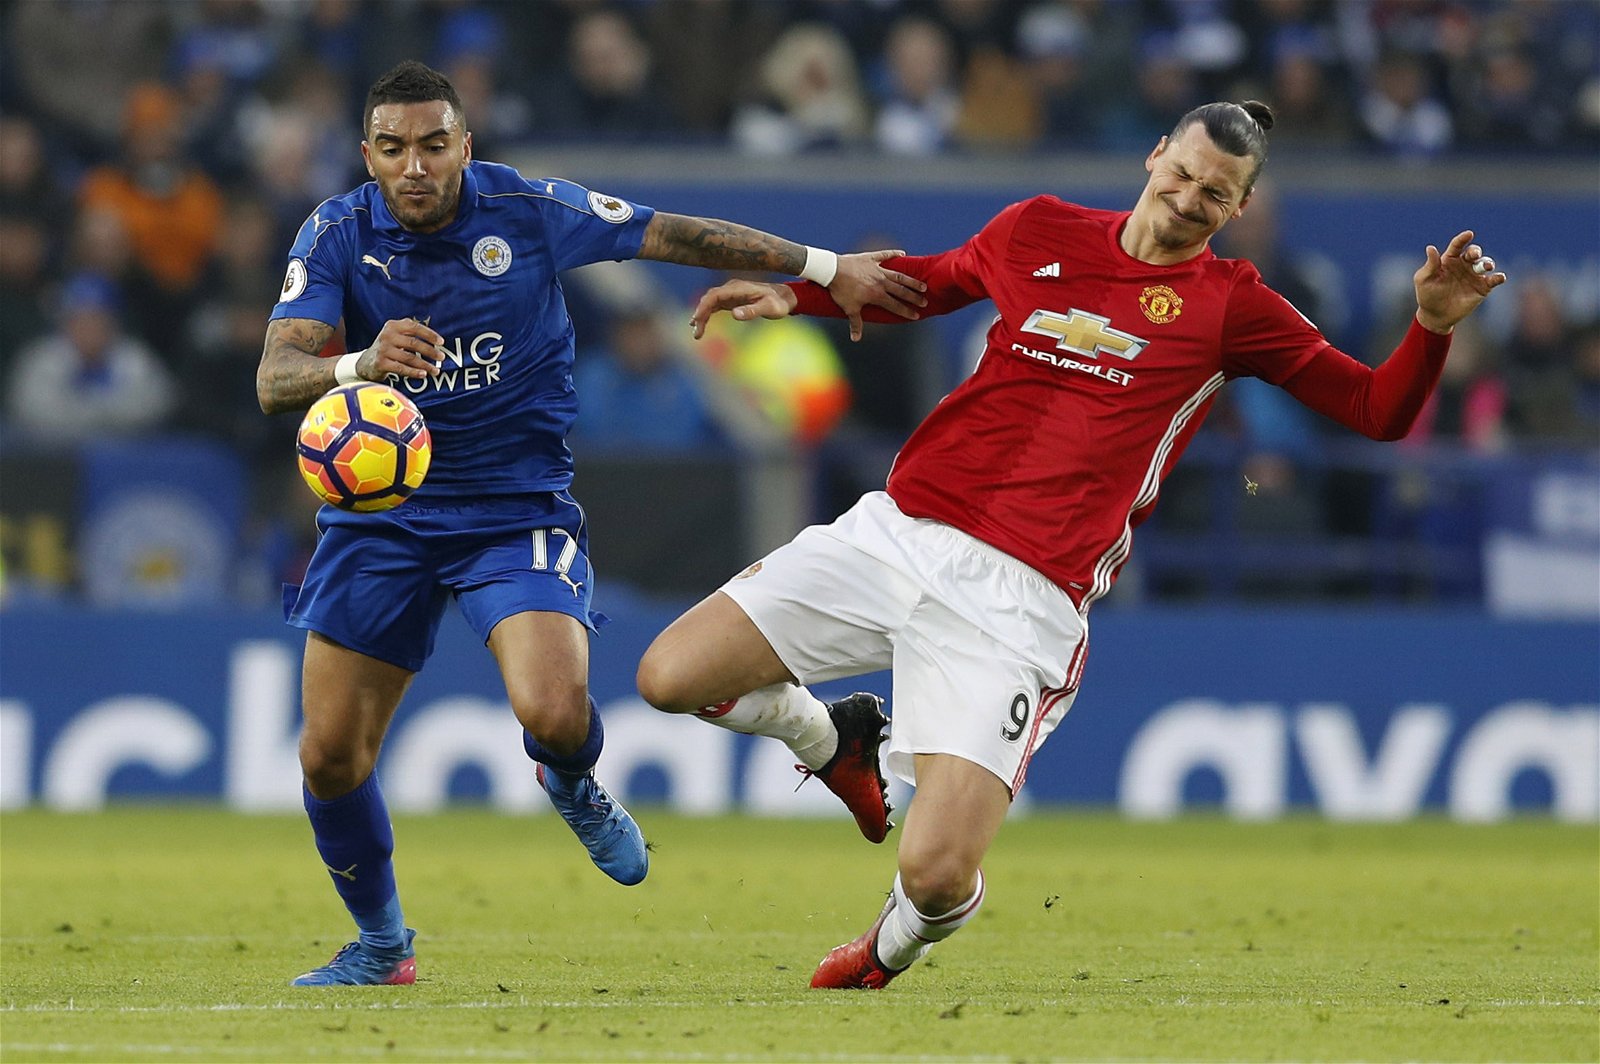 Manchester United vs Leicester City Predictions, Betting Tips and Match Preview